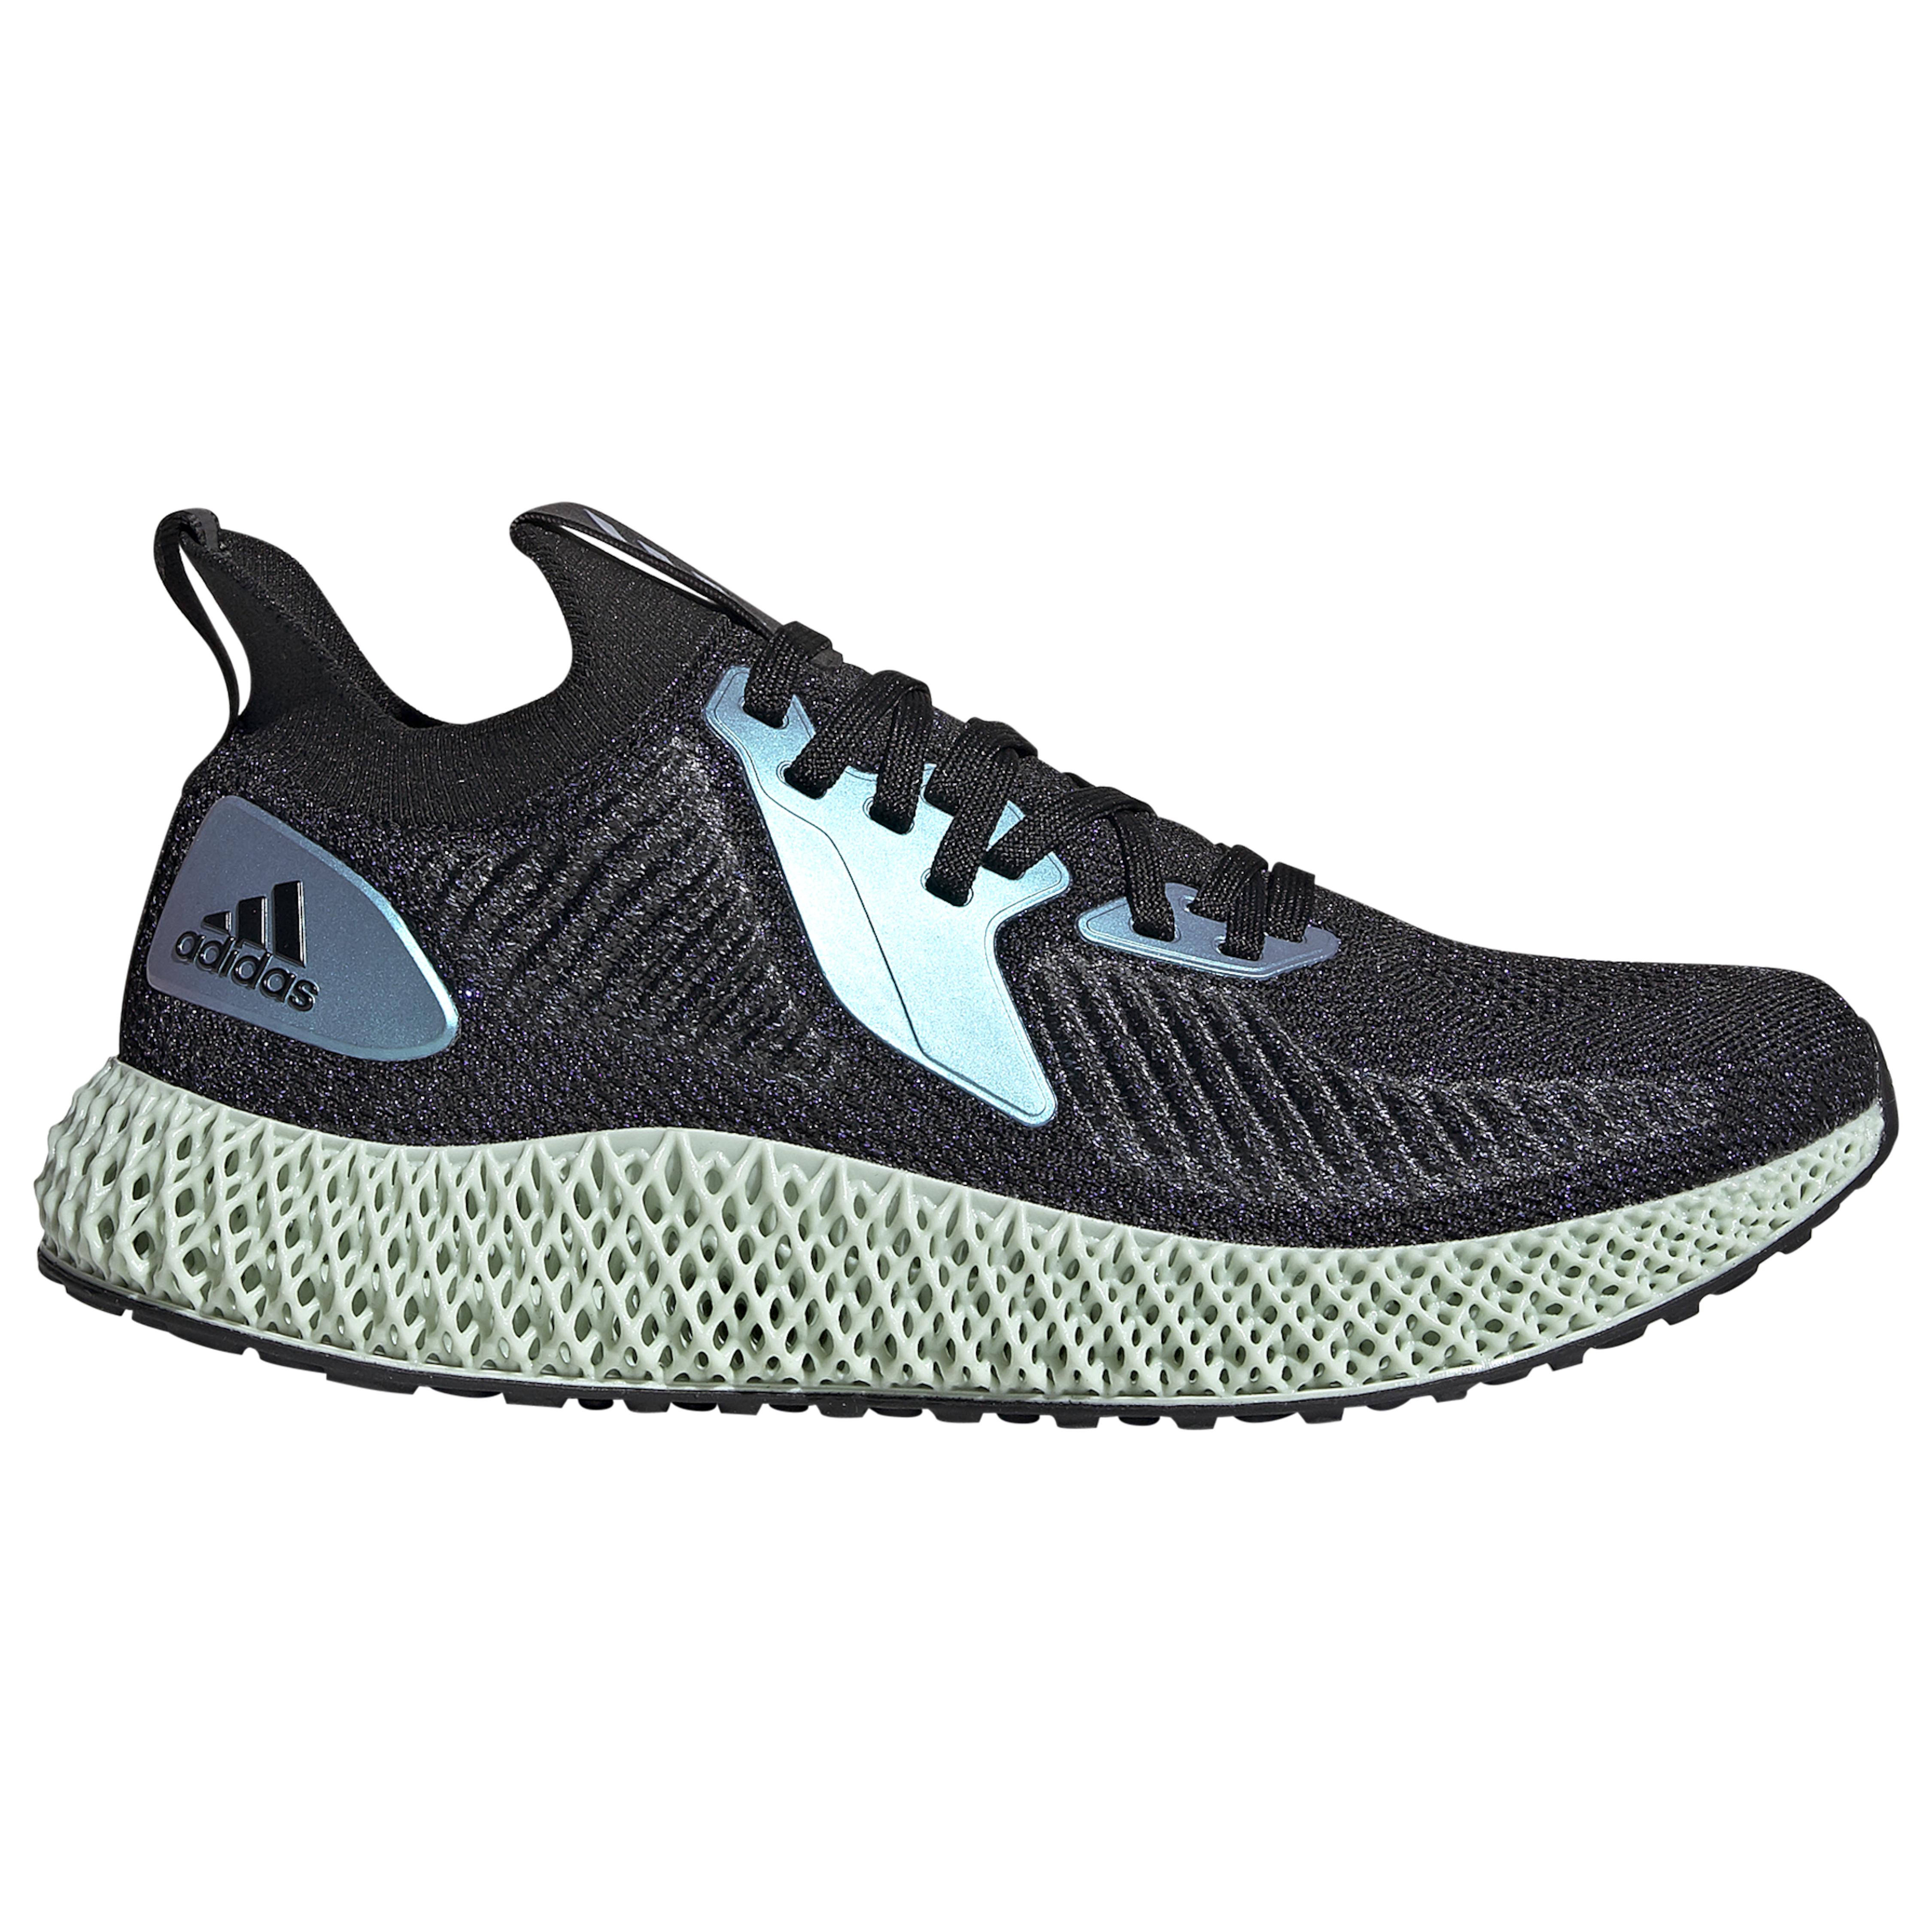 adidas Alphaedge 4d Running Shoes in Blue for Men - Lyst